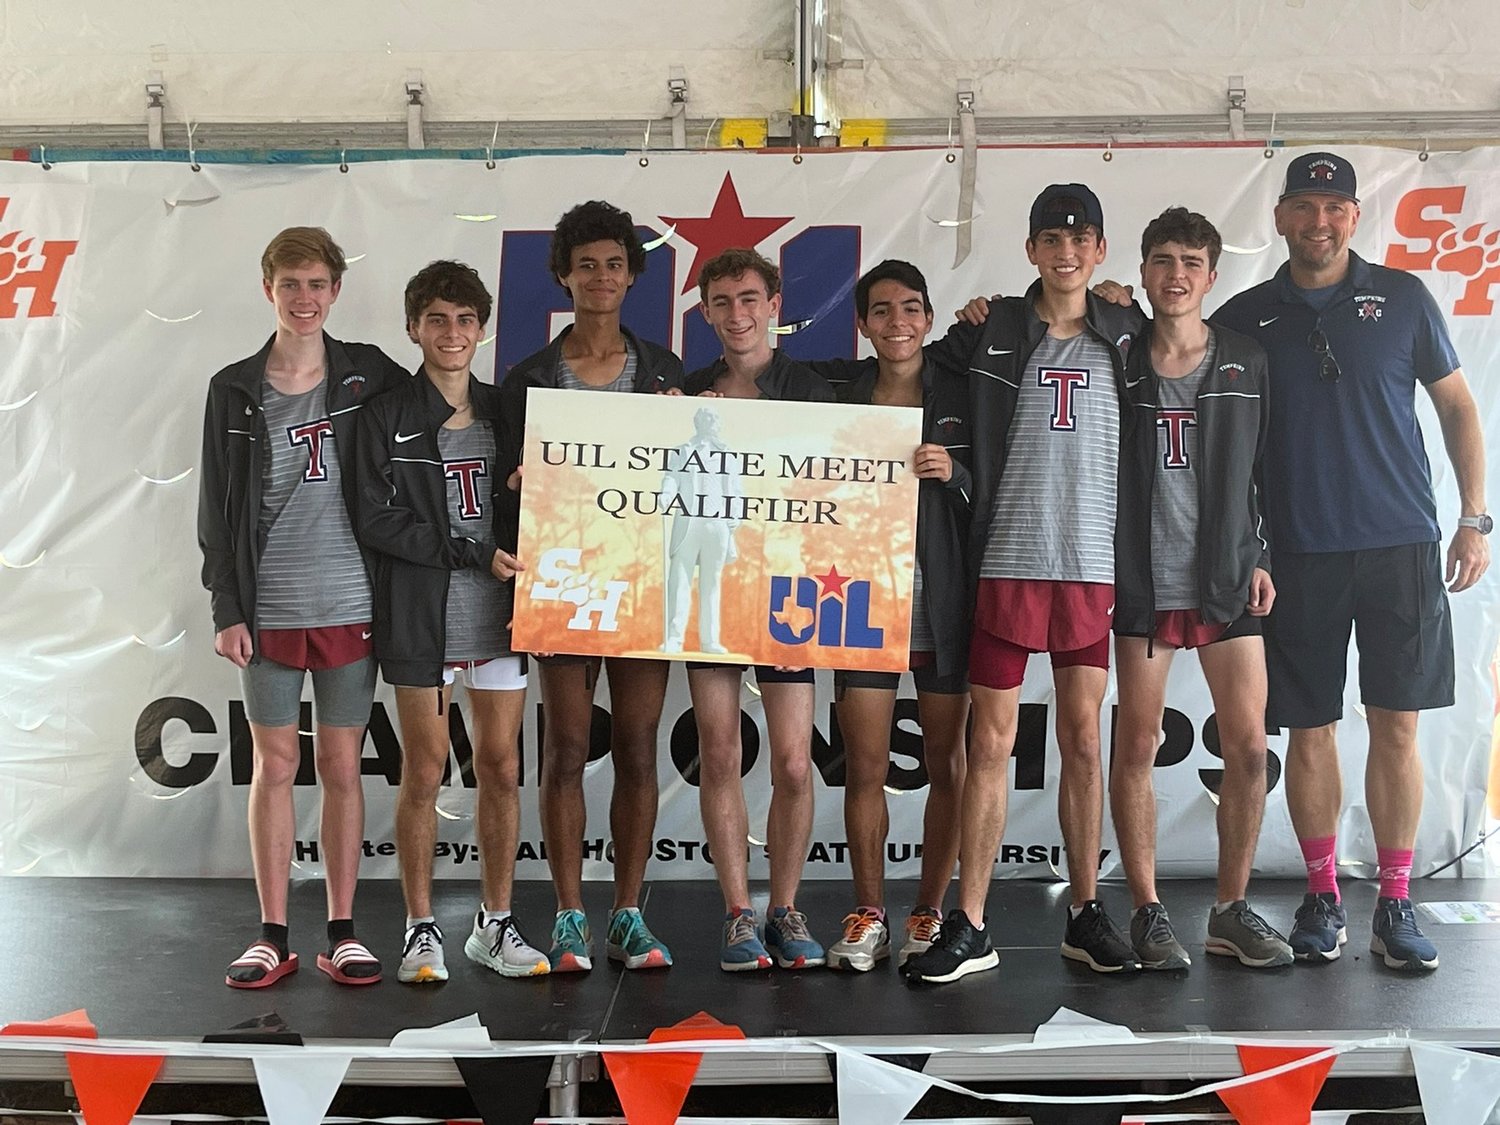 The Tompkins boys finished third as a team to qualify for the state meet.